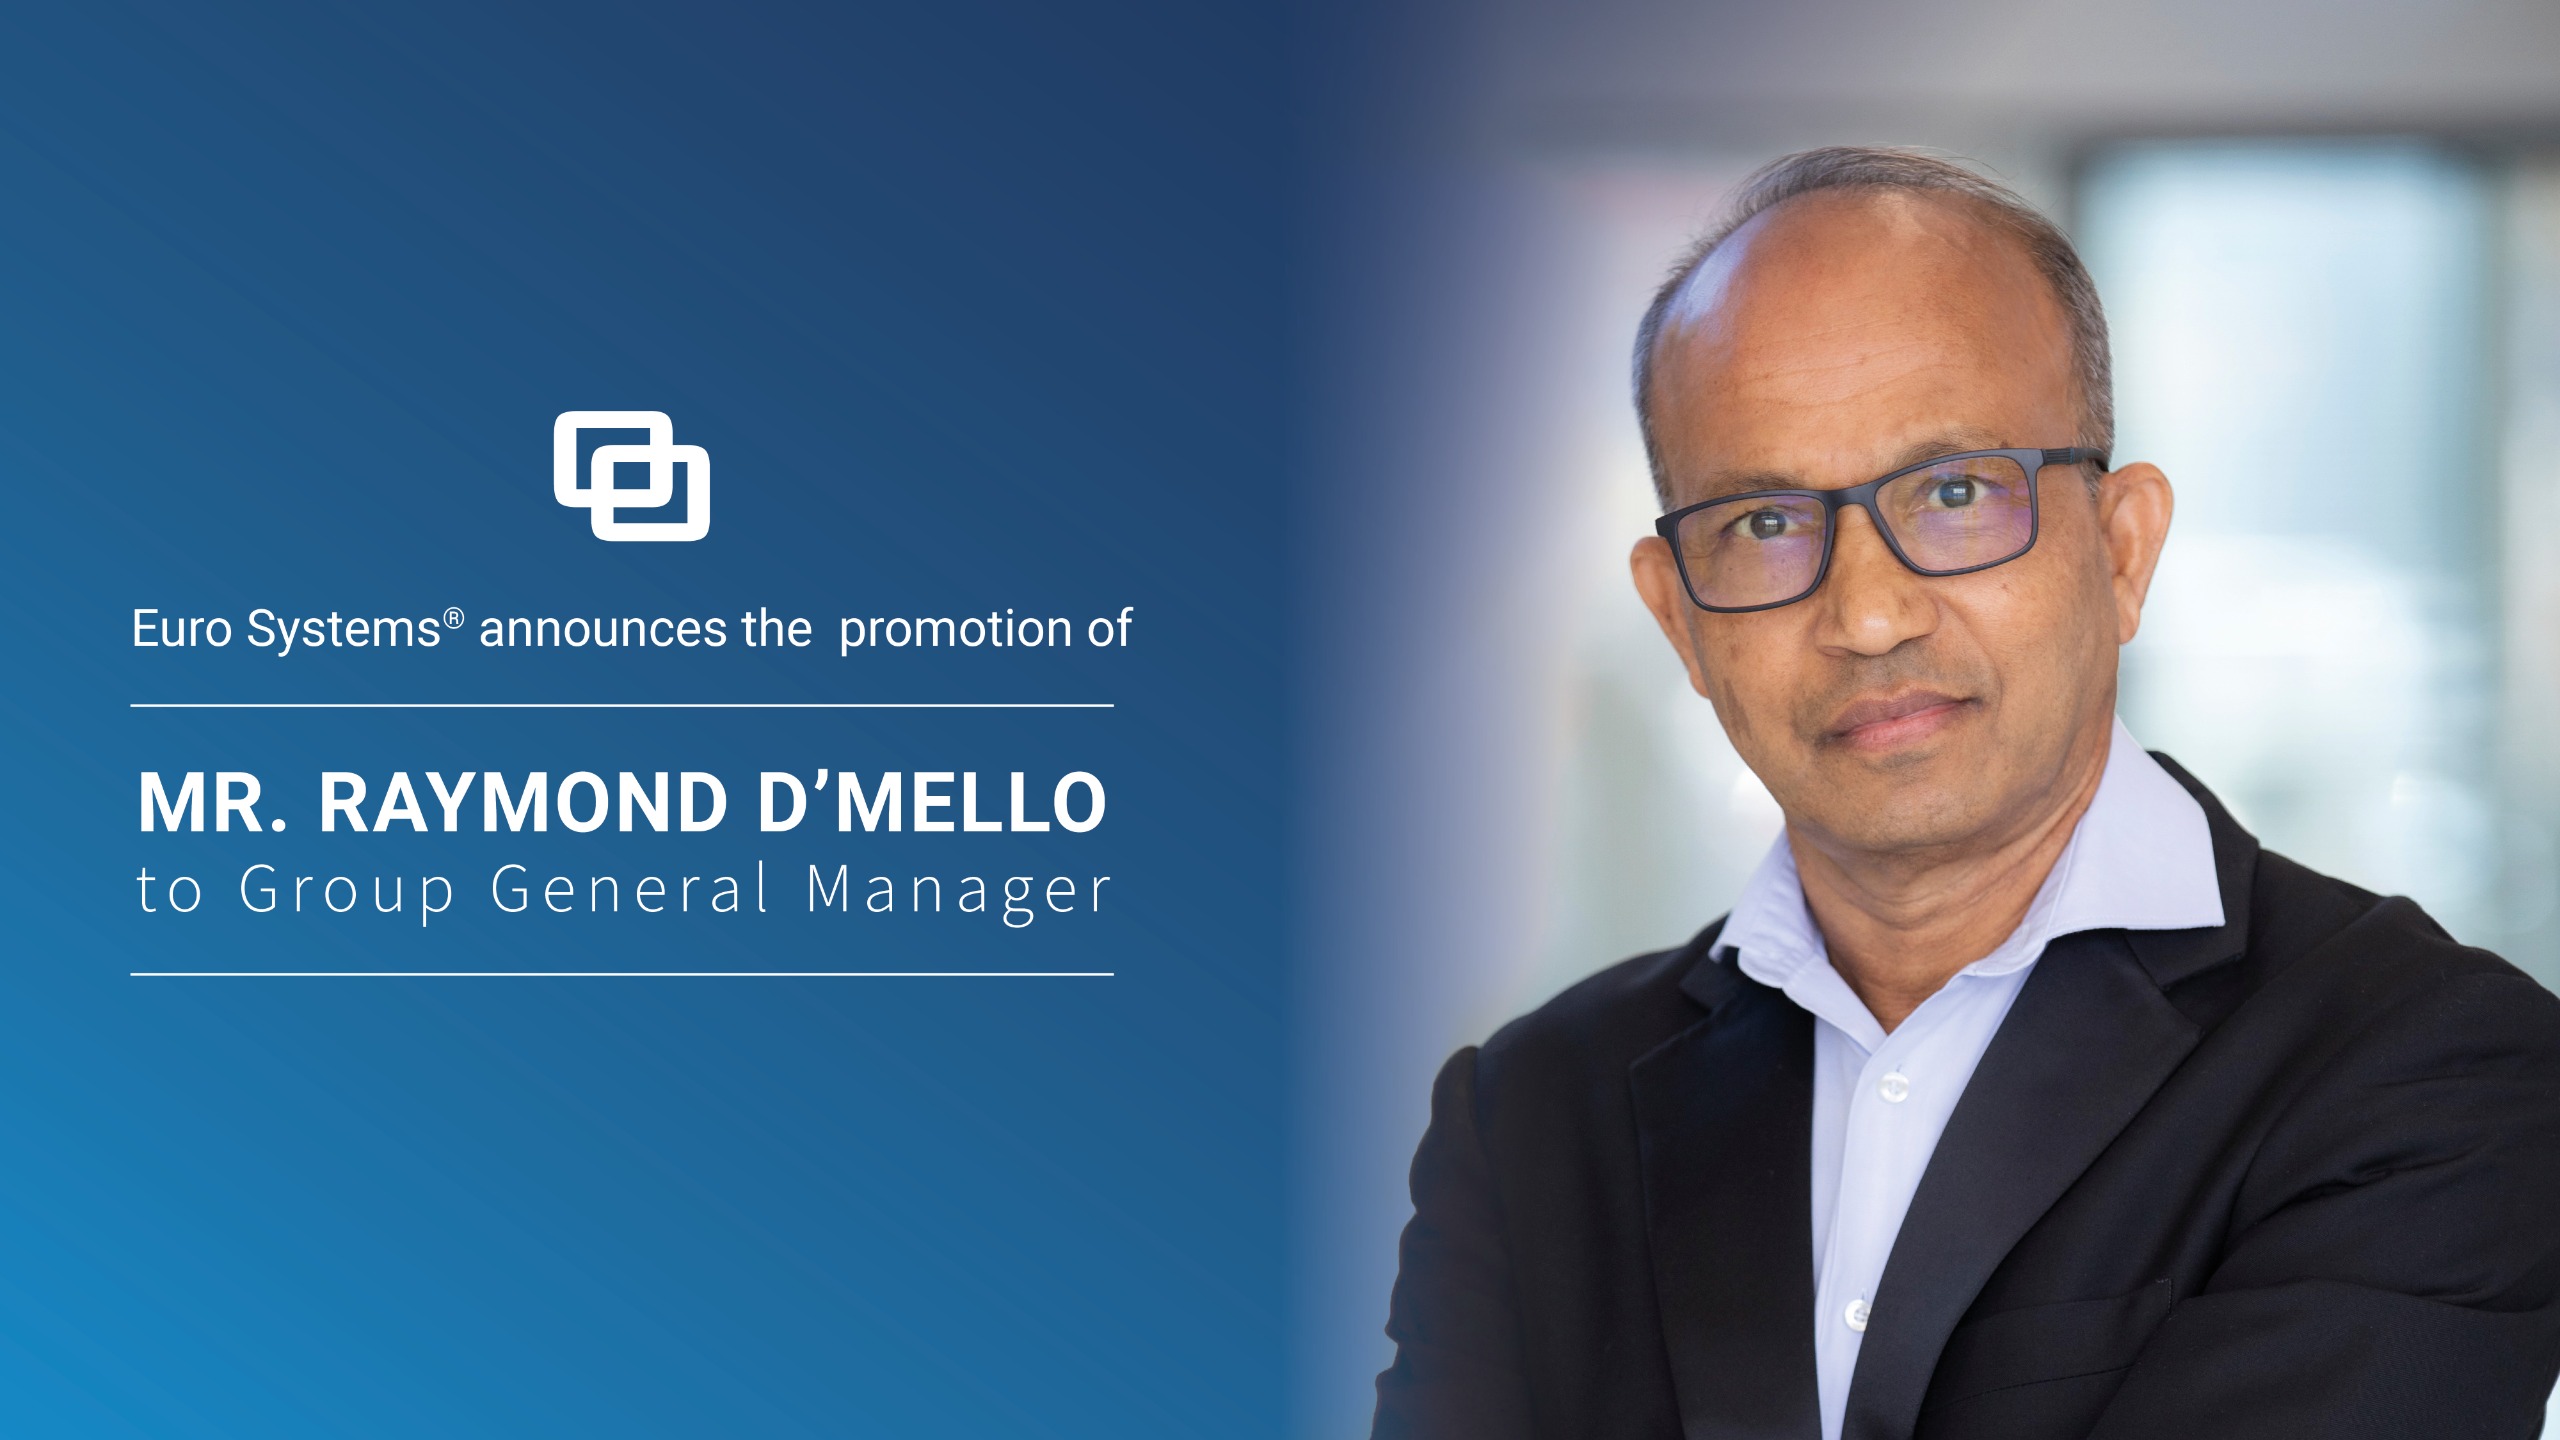 Raymond D'mello - Euro Systems® Group General Manager